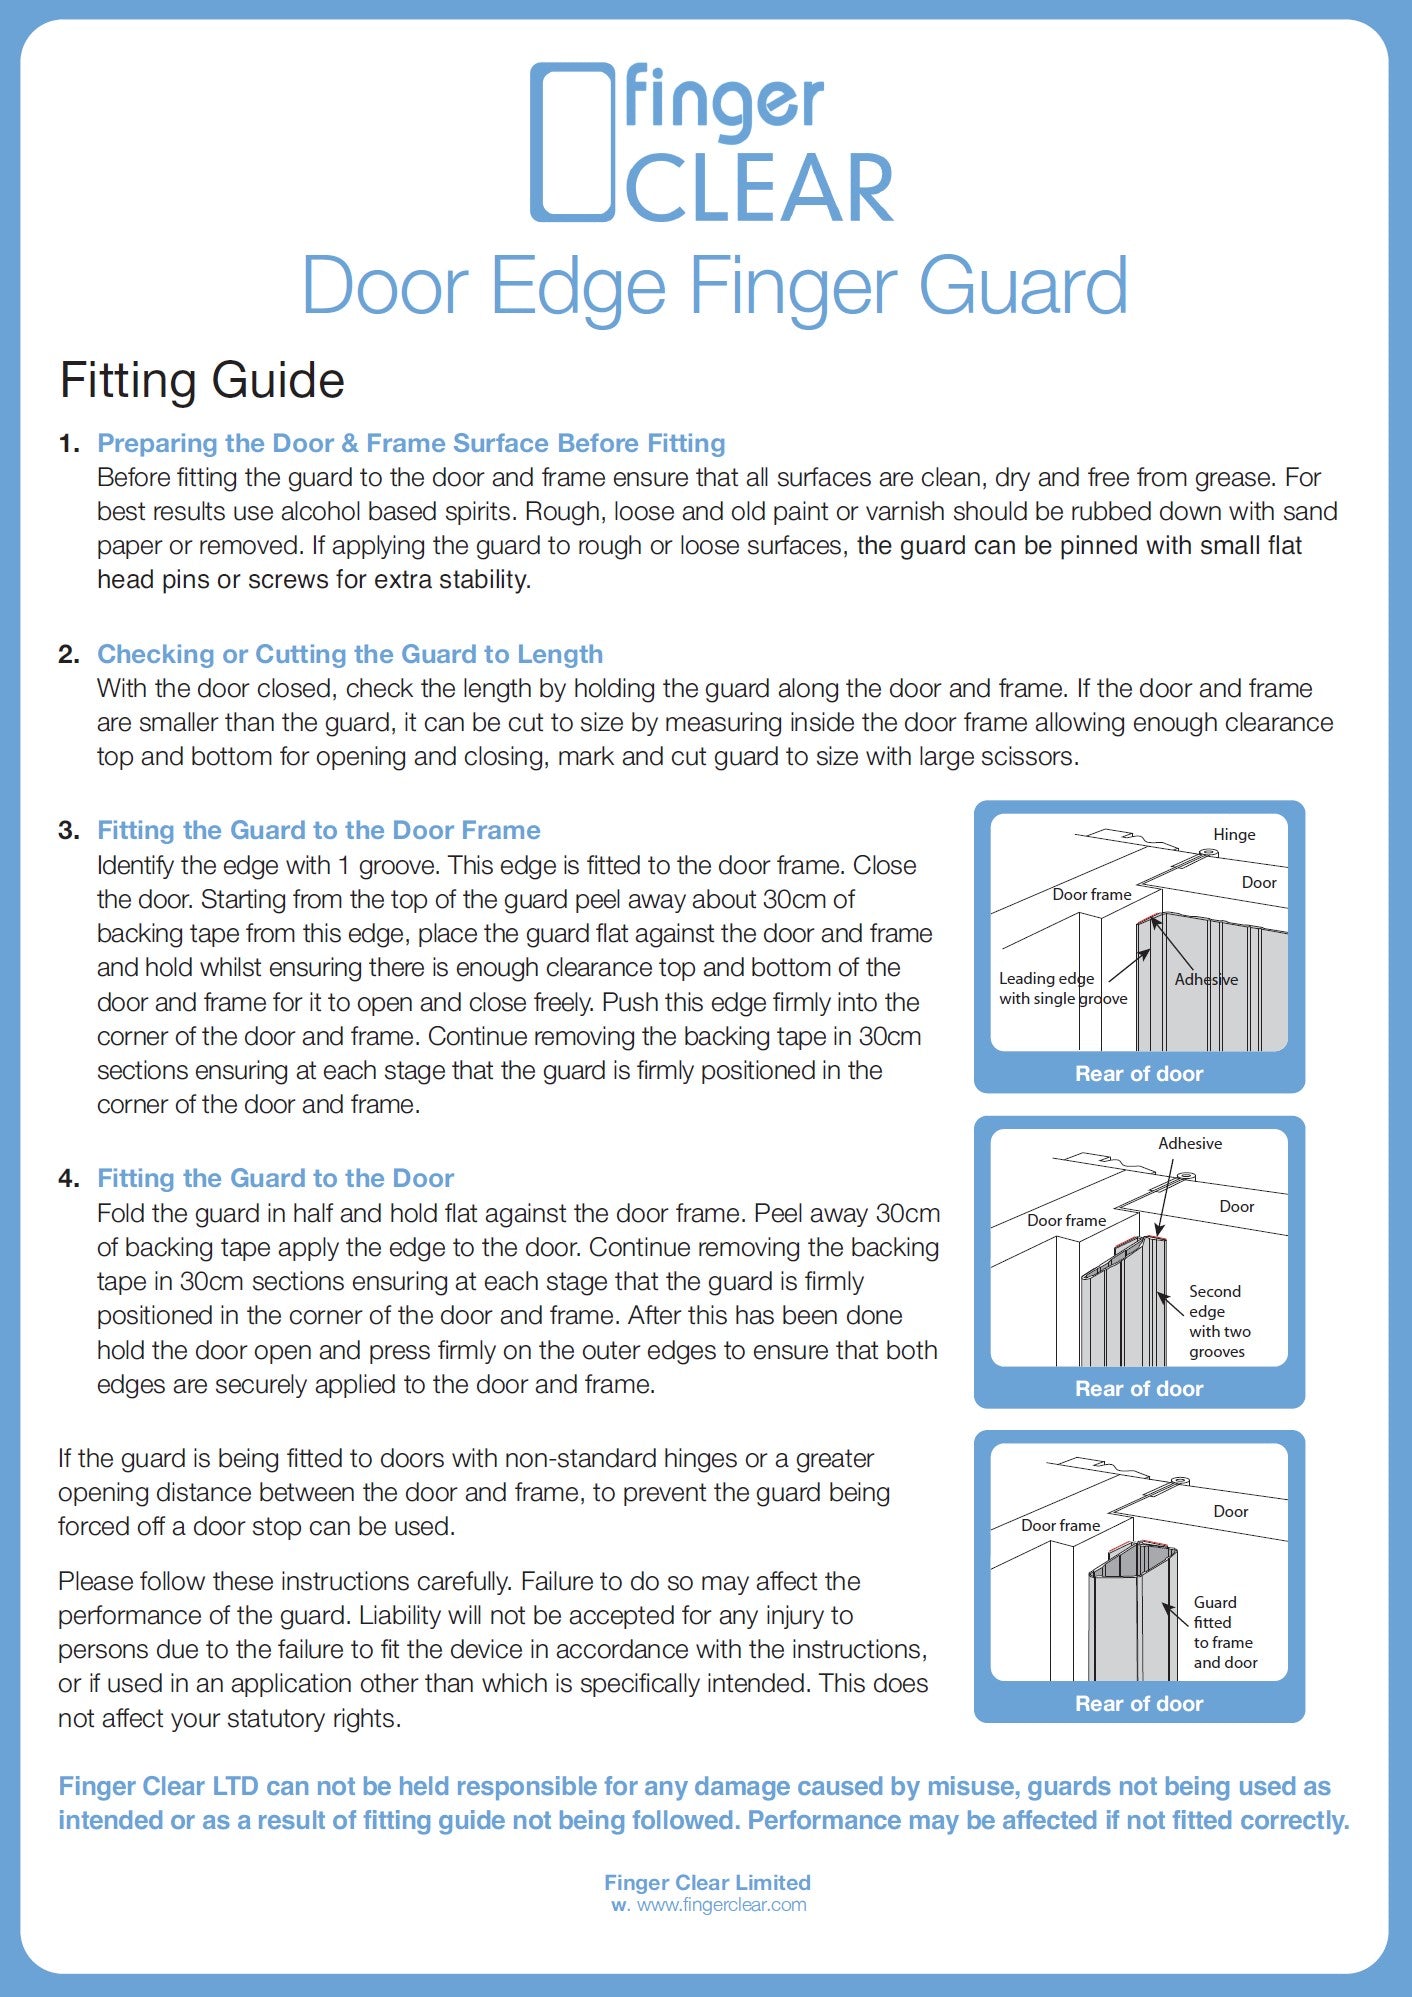 Finger Clear door guard fitting guide